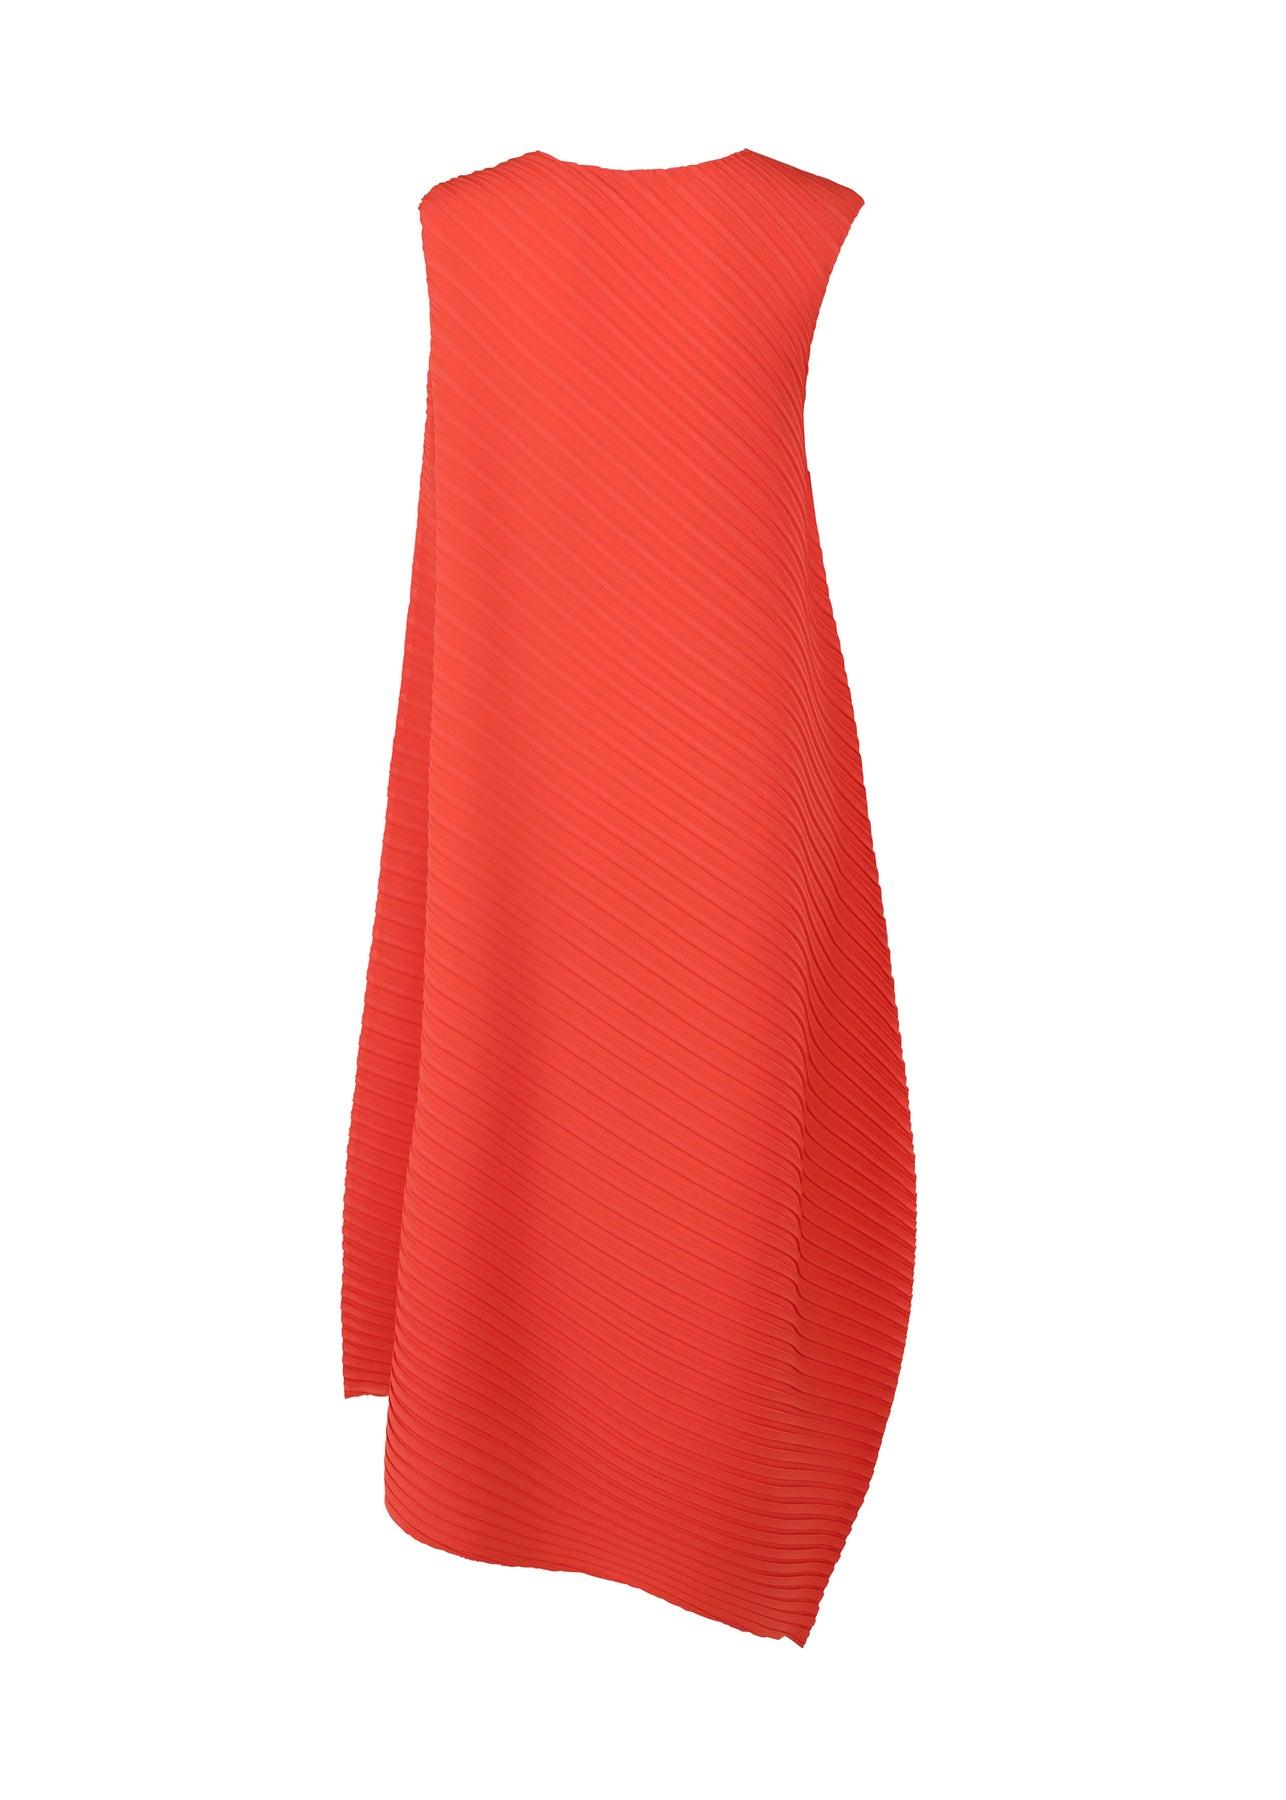 REITERATION PLEATS SOLID DRESS | The official ISSEY MIYAKE ONLINE